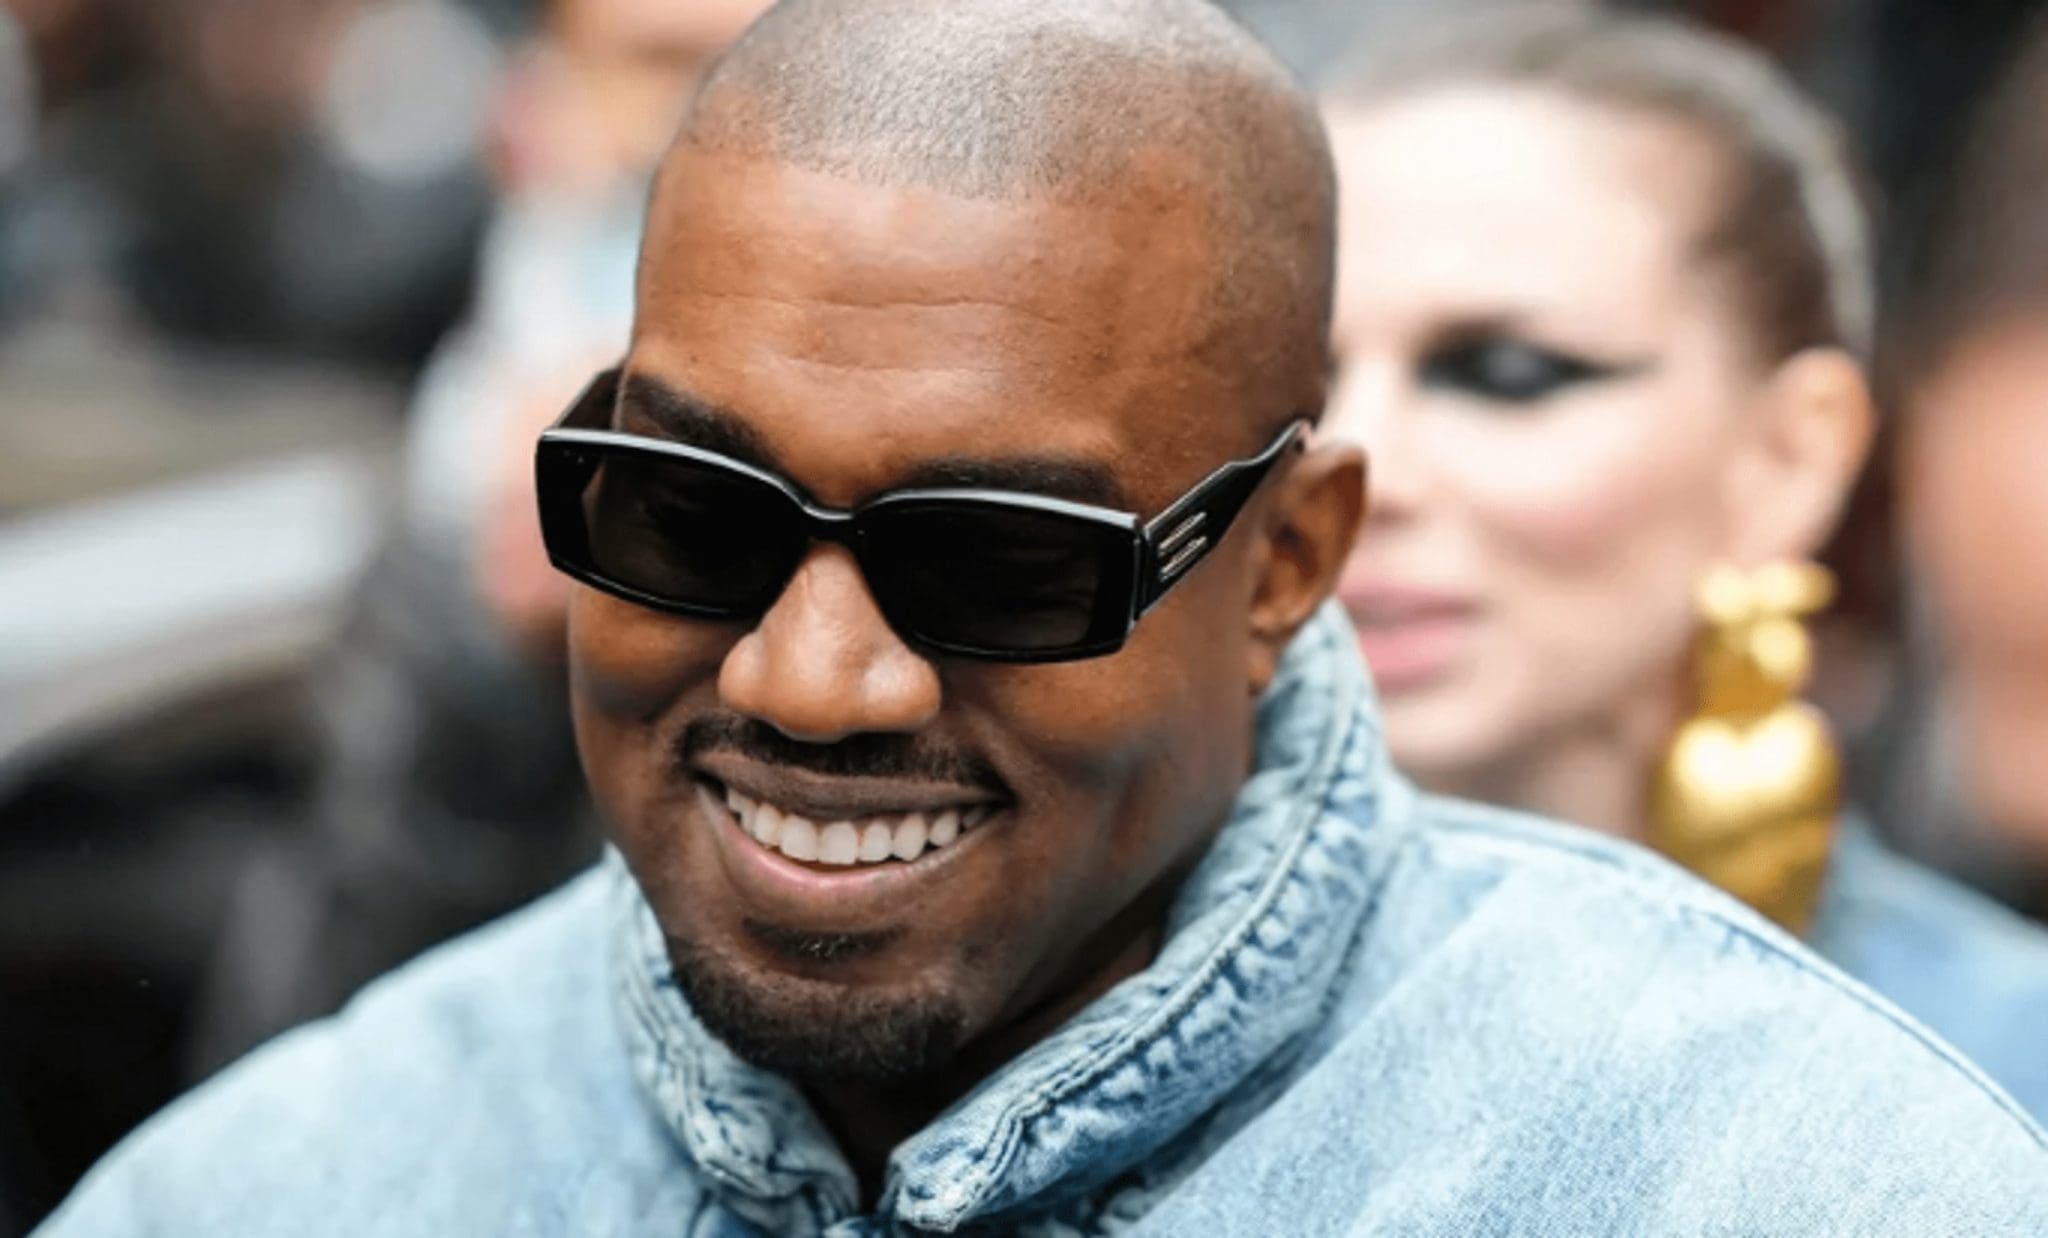 Kanye West Remembered Working With The President Of The Gap Bob L. Martin Business And Said That The Two Of Them Were Able To Sell $ 14 Million Worth Of Black hoodies